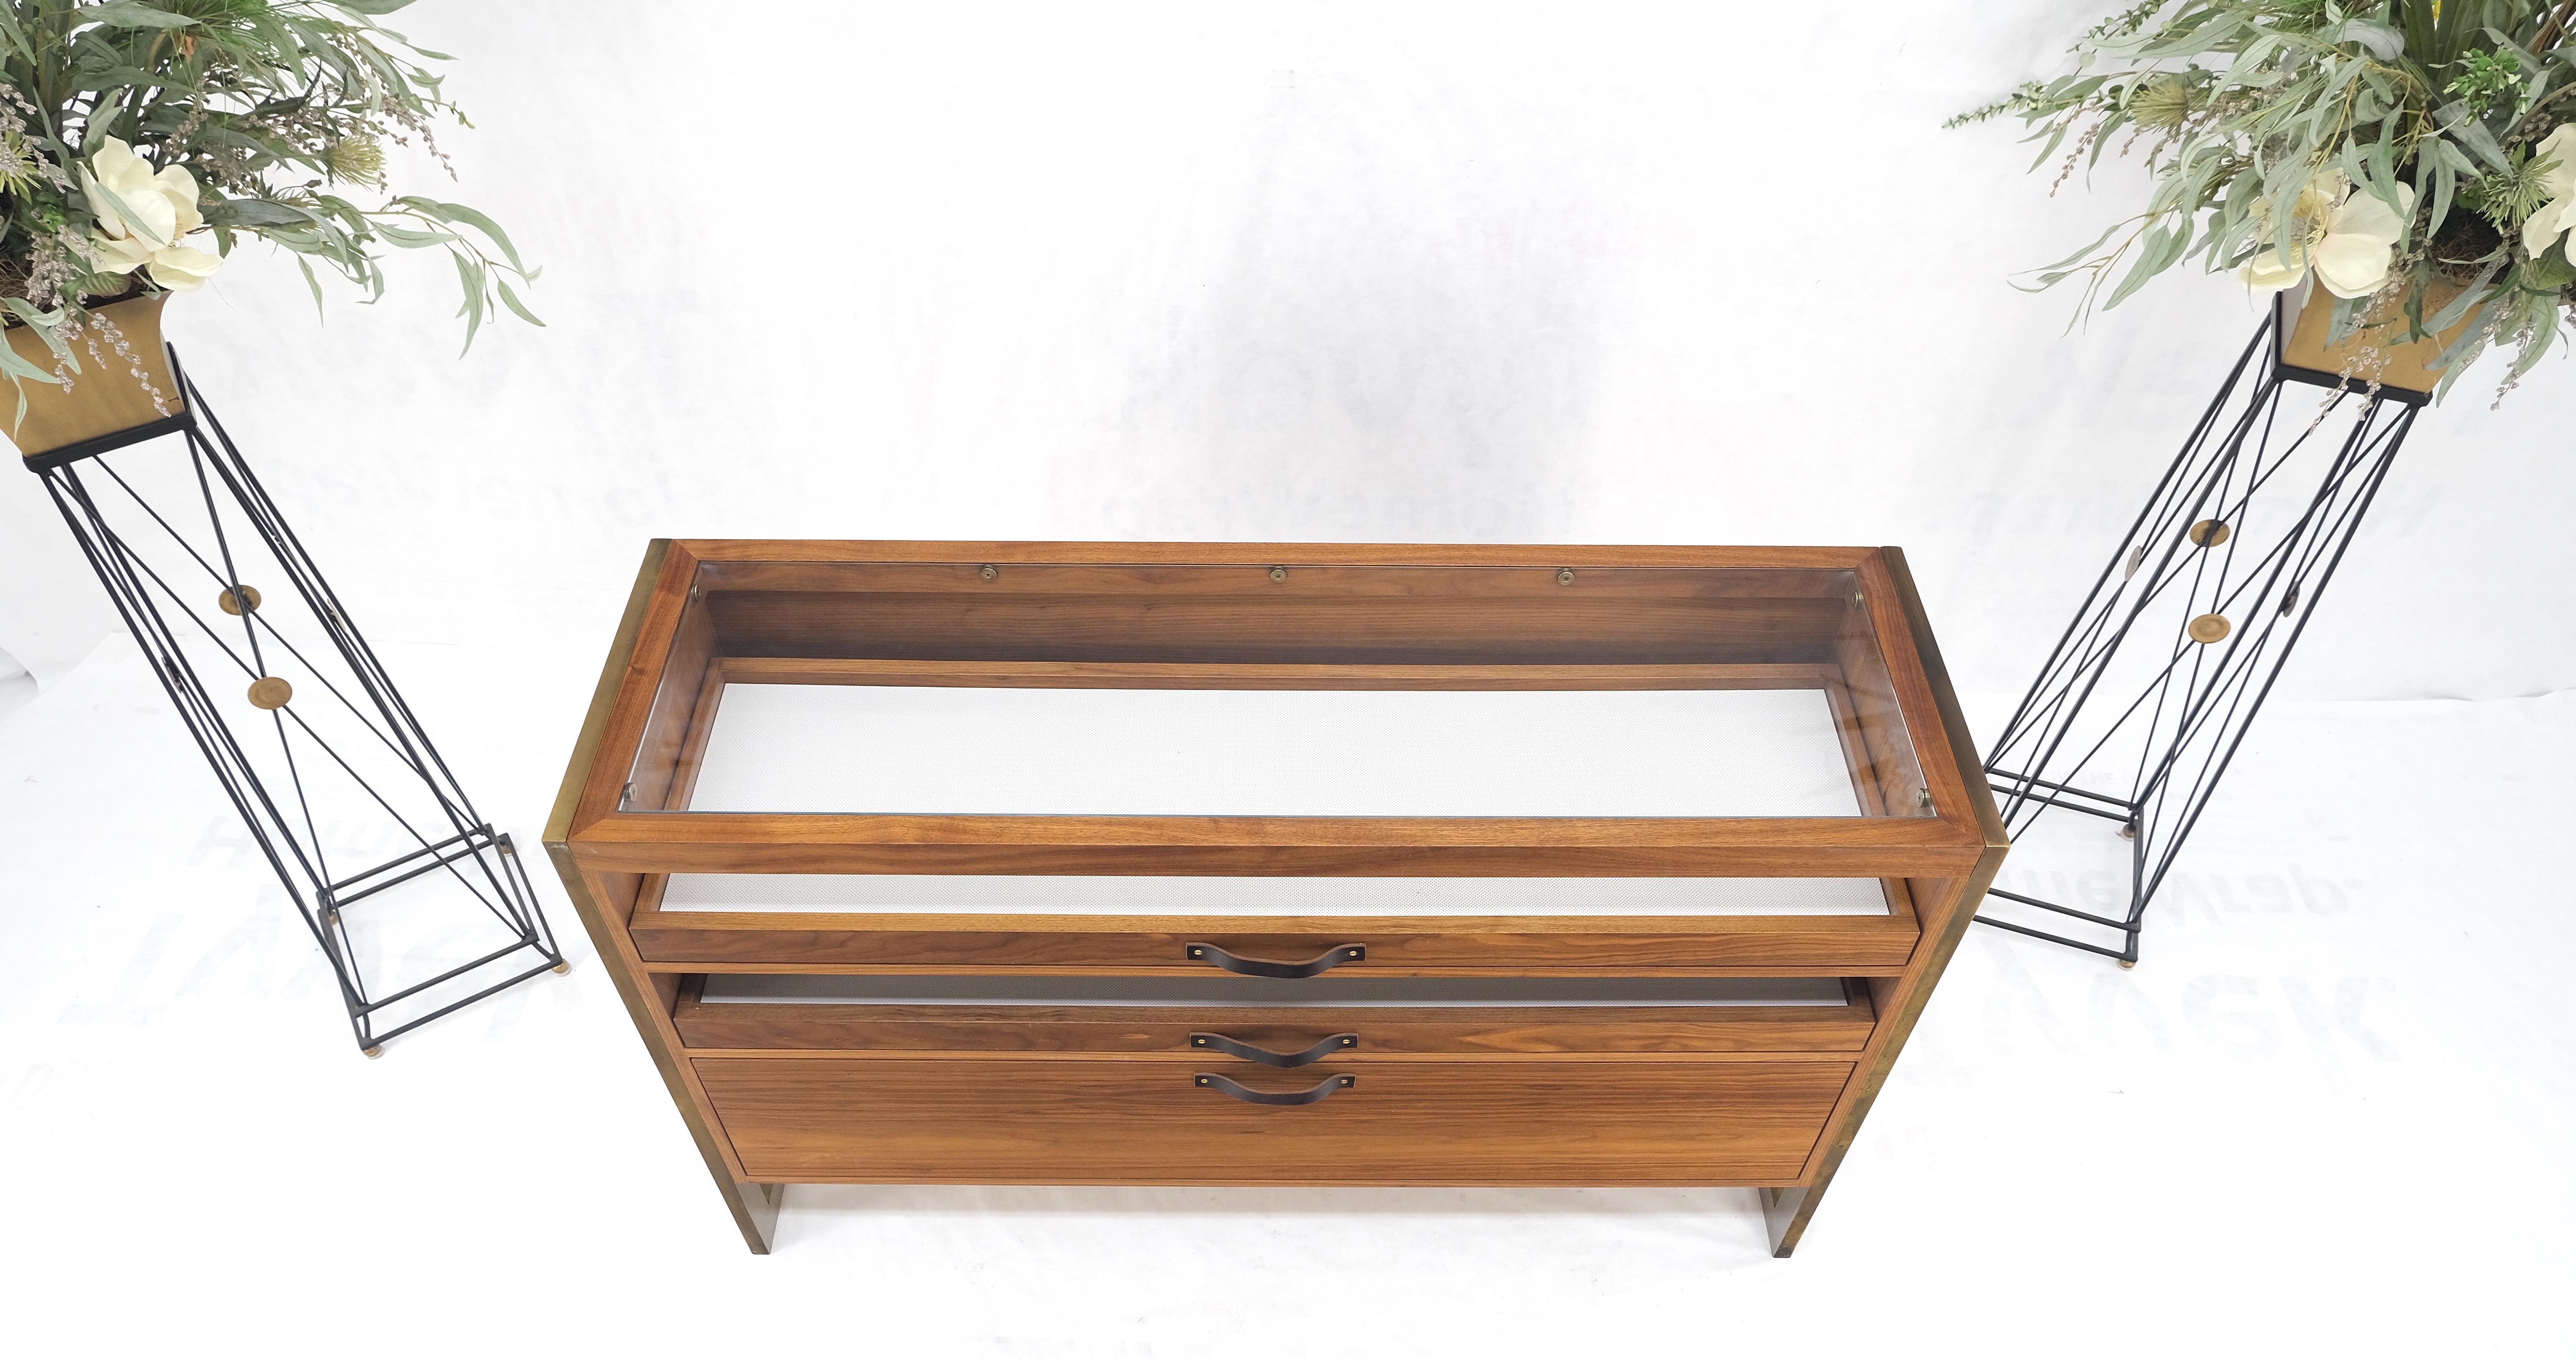 Lacquered Unusual Mid-Century Modern Solid Walnut Console Sofa Table with Drawers Mint! For Sale